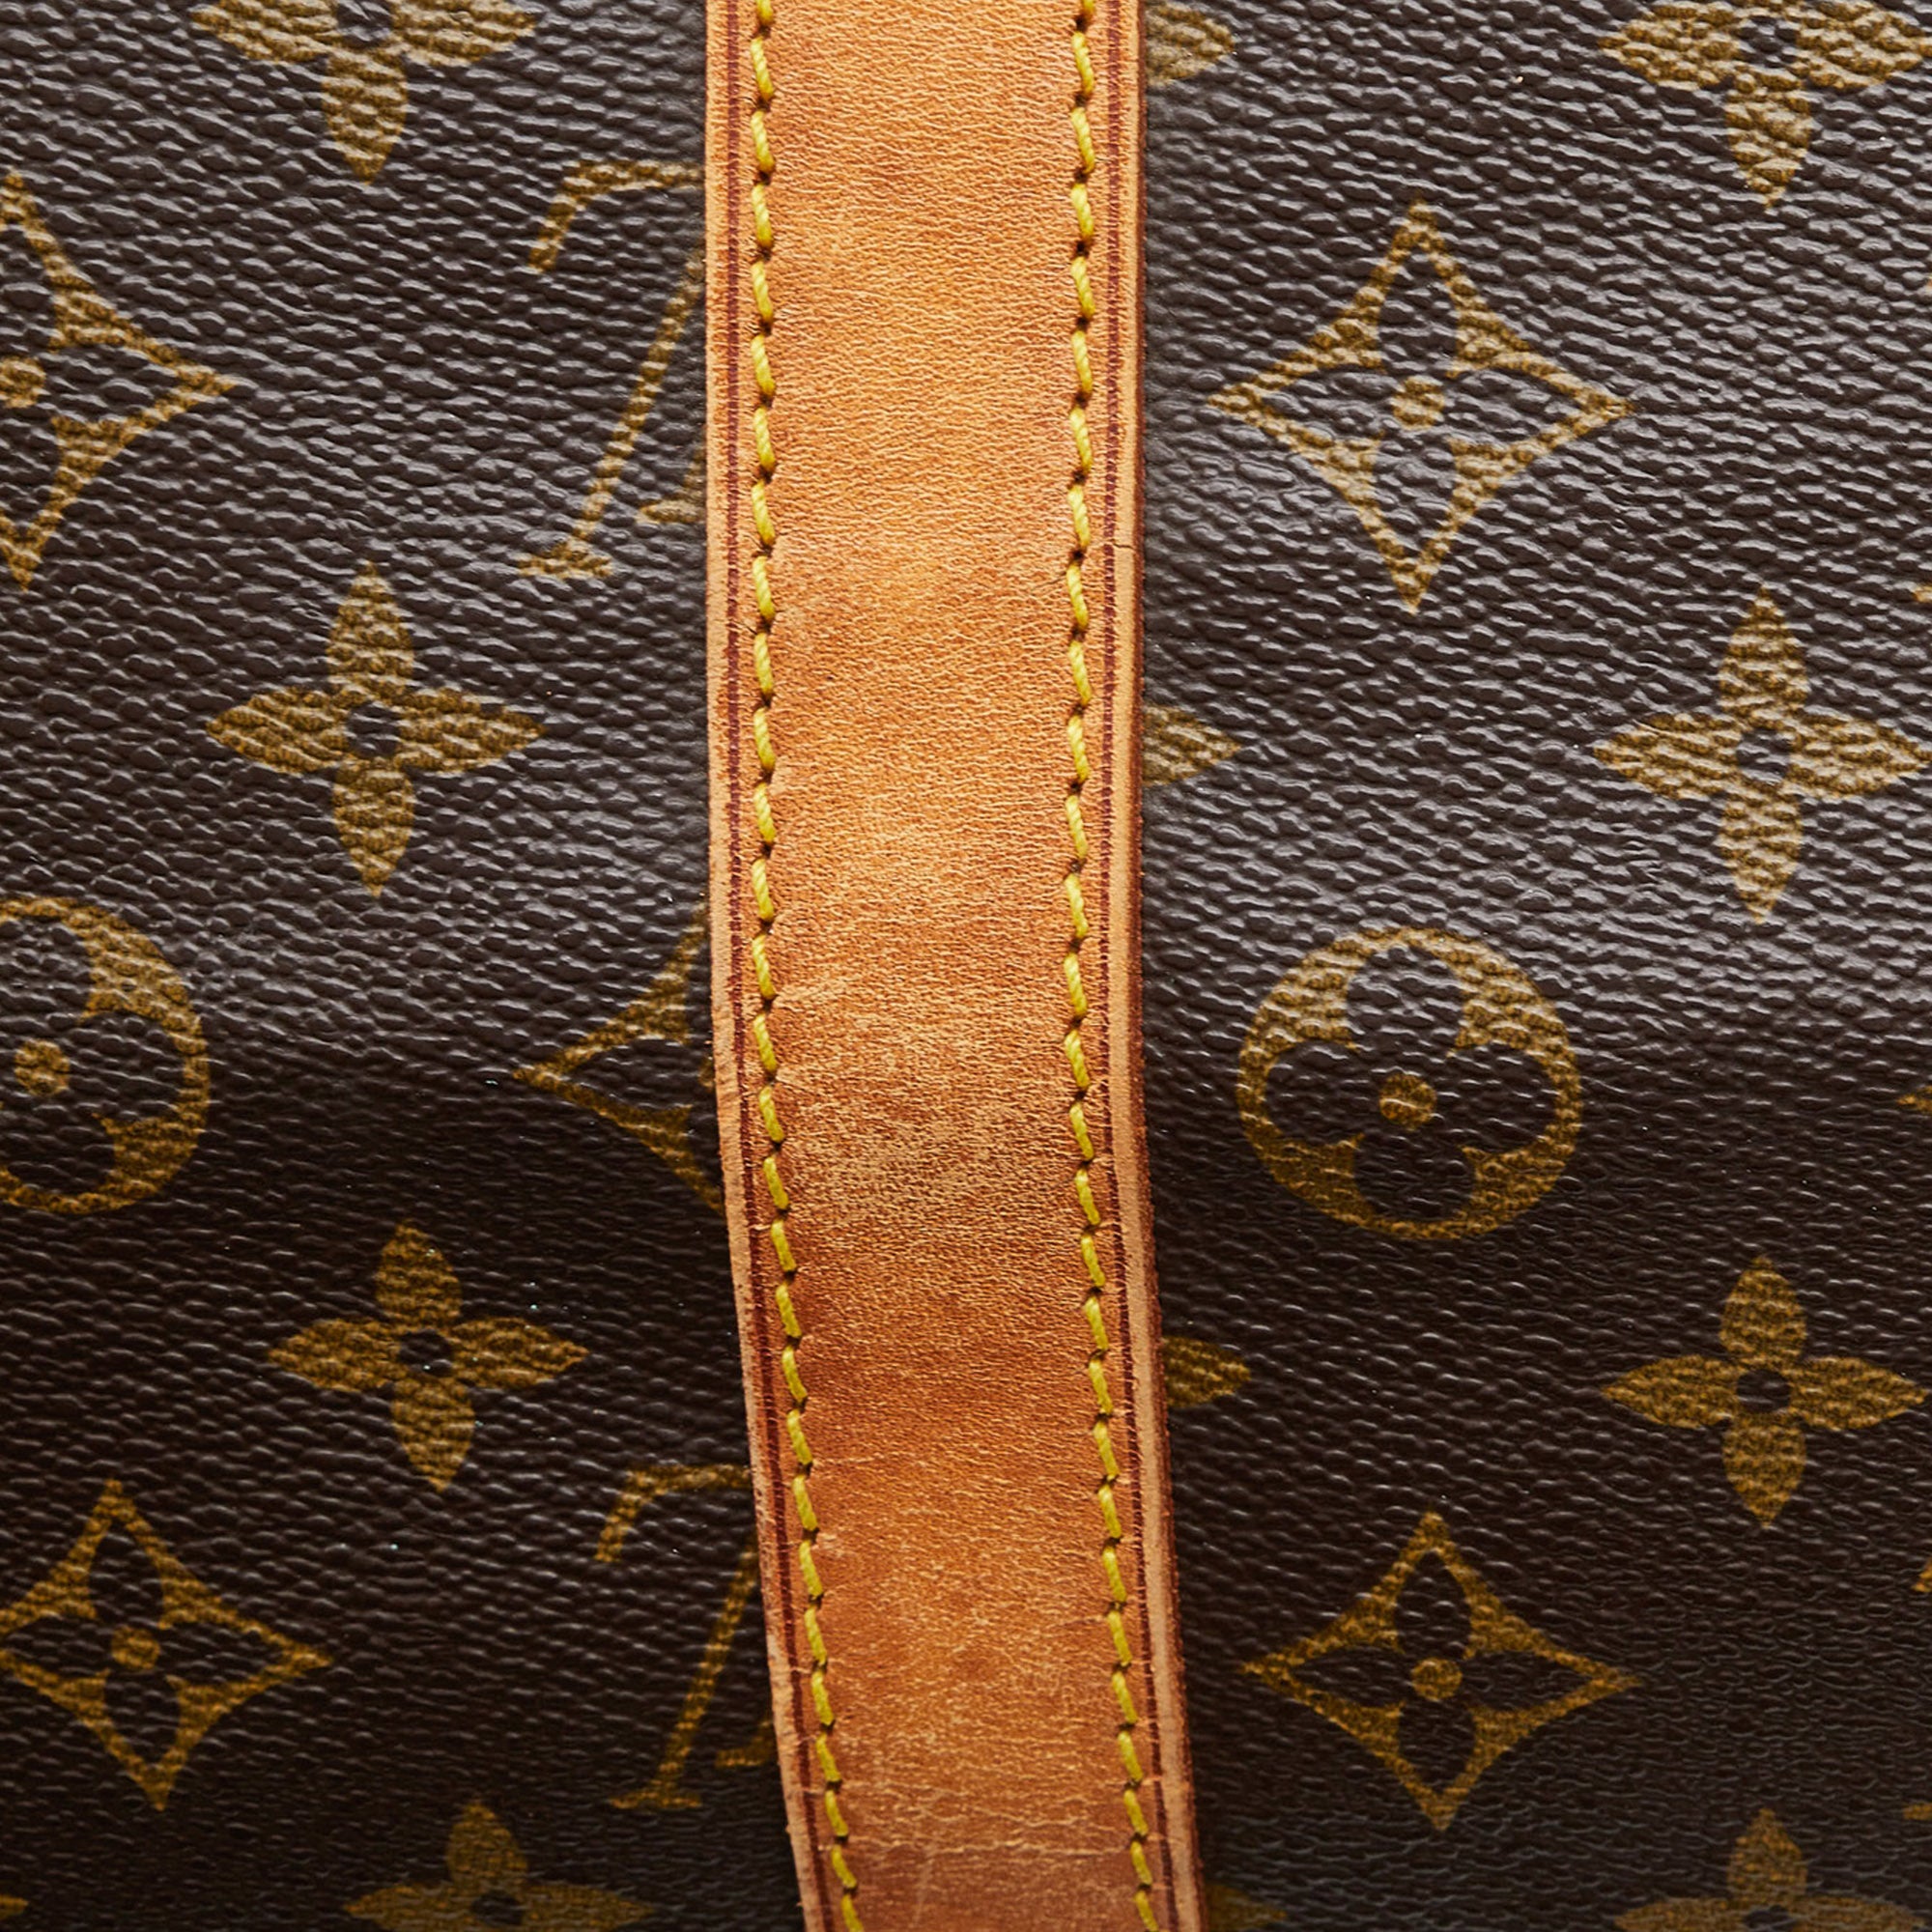 Louis Vuitton Sully PM REVIEW-- Still worth it? What fits inside